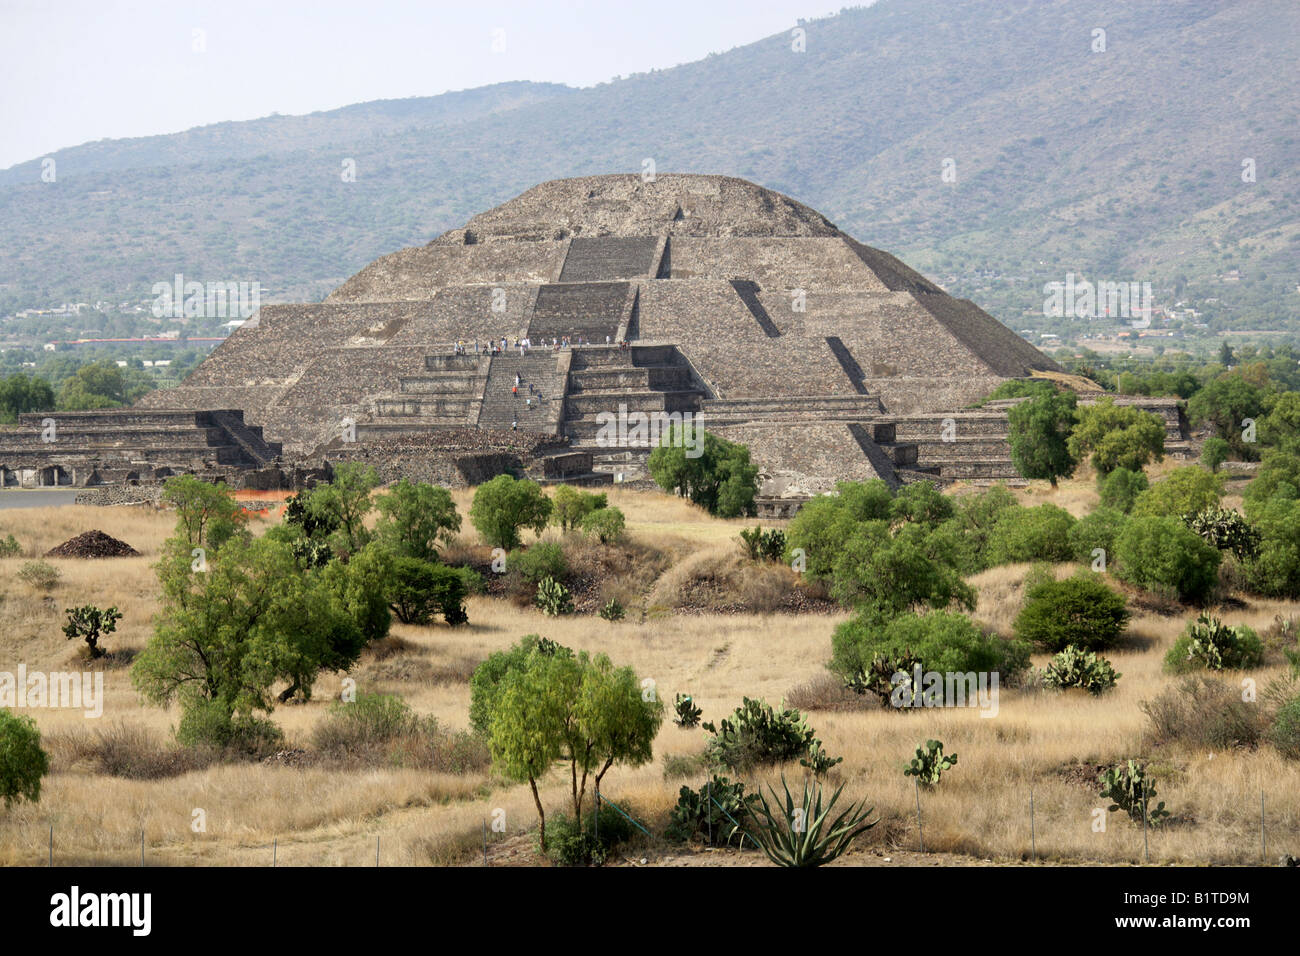 The Pyramid of the Moon from the Pyramid of the Sun, Teotihuacan, Mexico Stock Photo